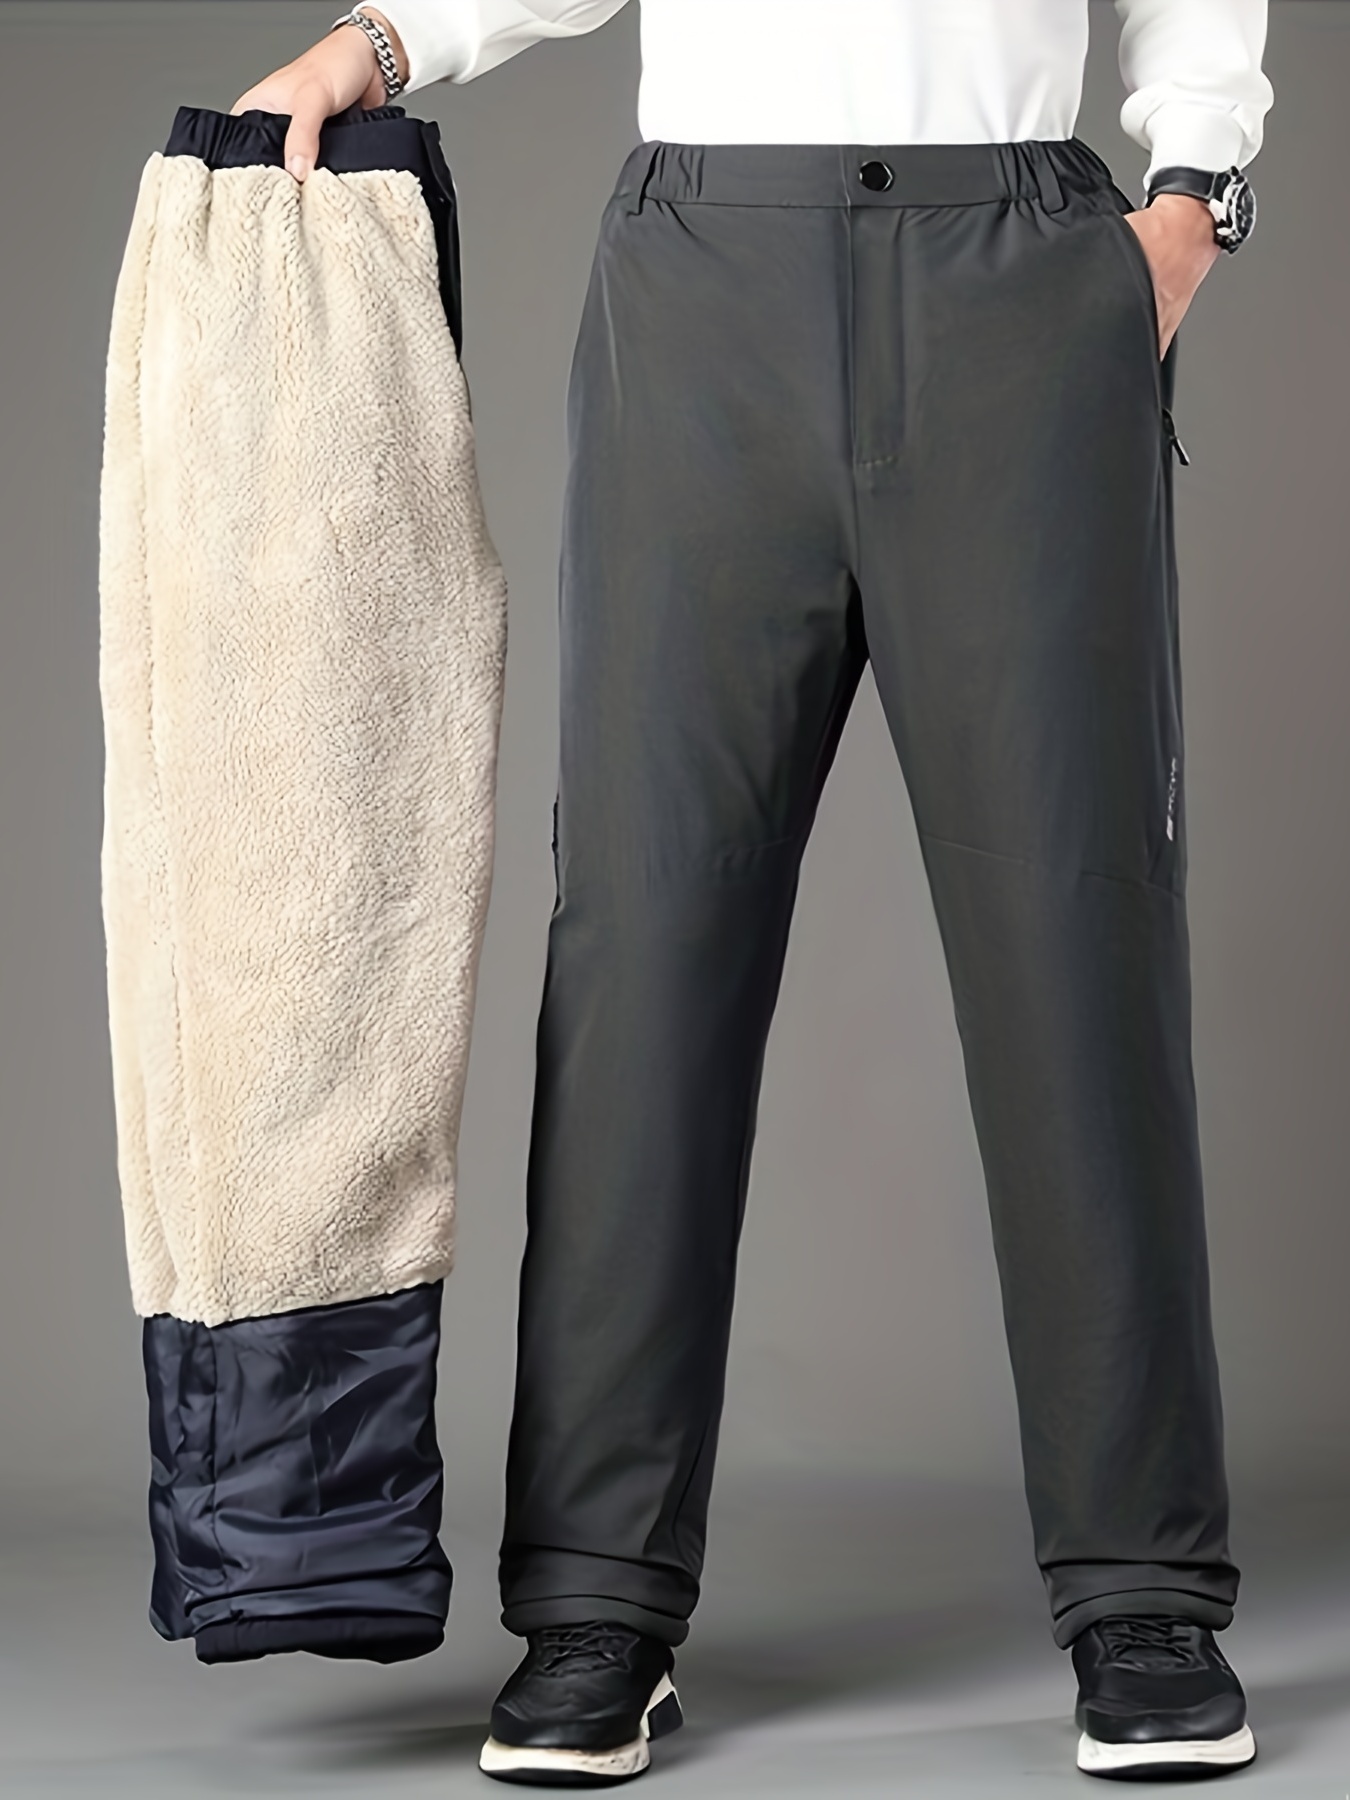 New Mens Winter Warm Pants Thermal Trouser Mid Waist Fur Lined